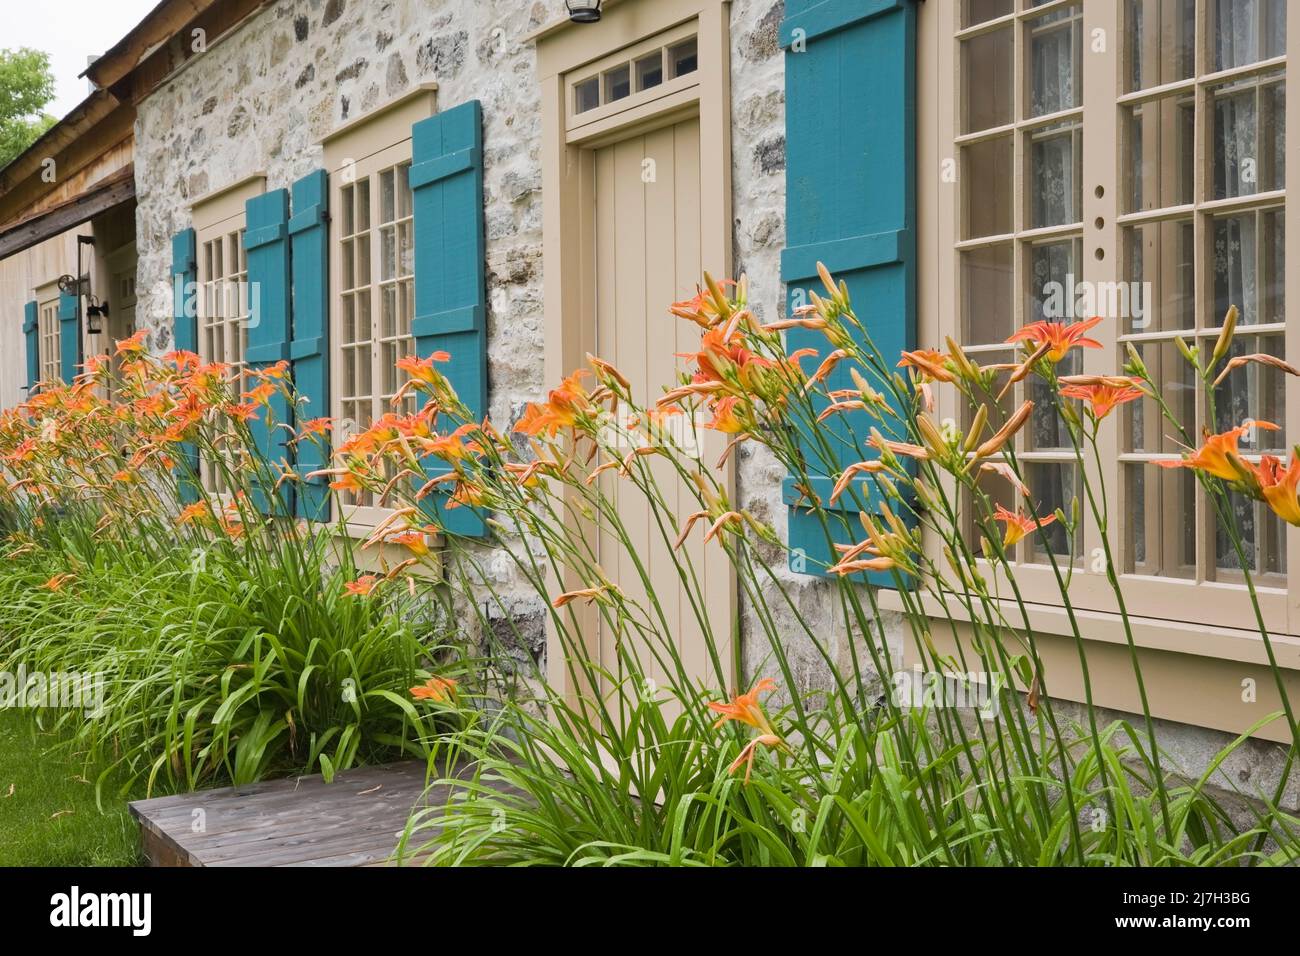 Tan wood plank entrance door and windows with teal blue shutters on old 1722 fieldstone home in summer. Stock Photo